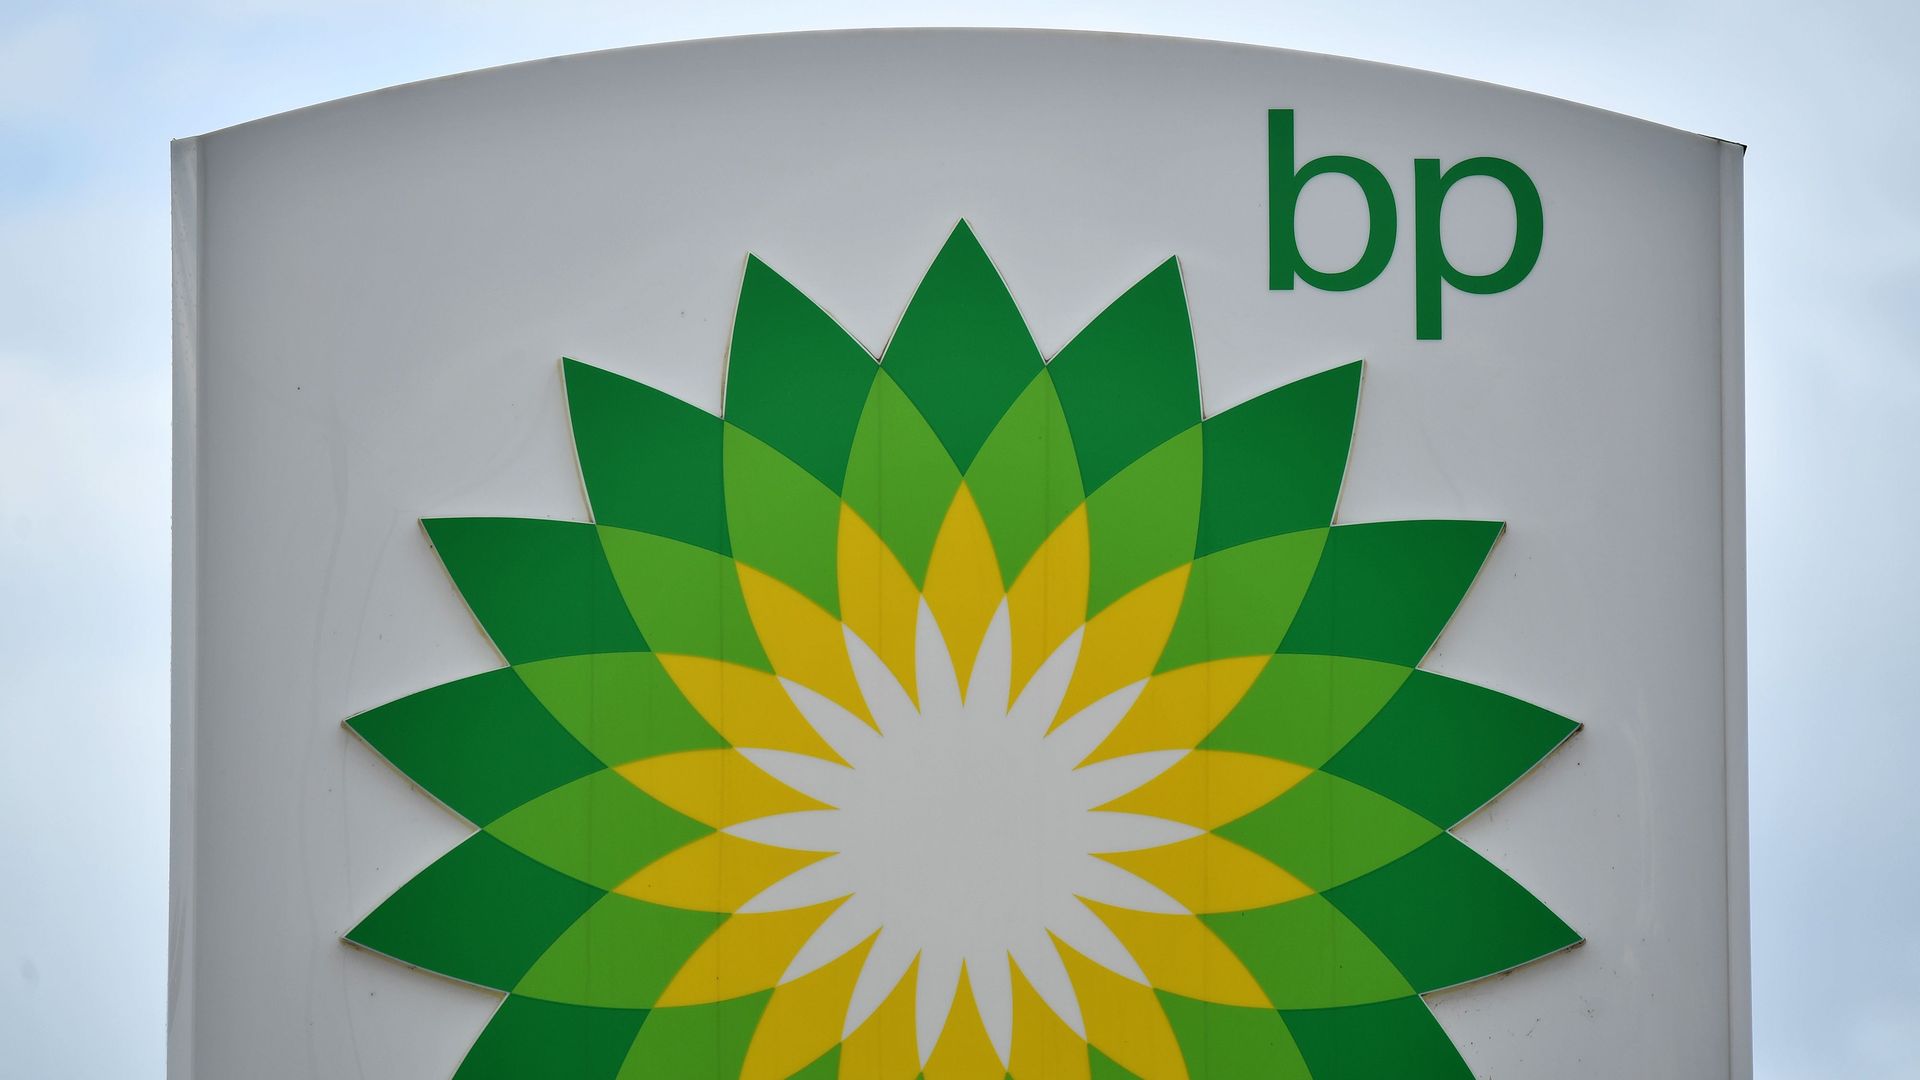 BP logo from a gas station in London